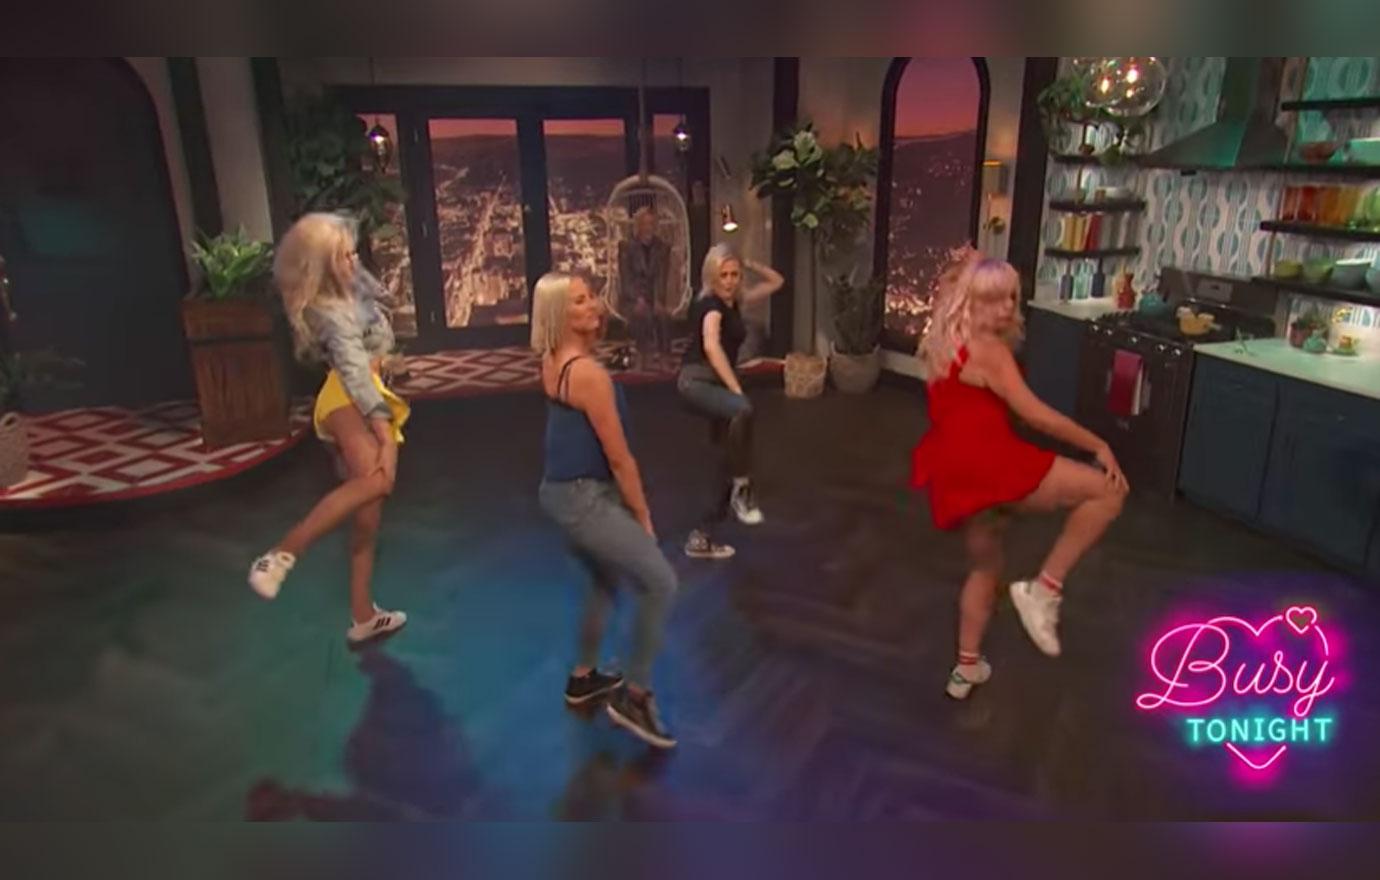 The Cast Of 'White Chicks' Just Reunited To Recreate Their Iconic Dance  Battle